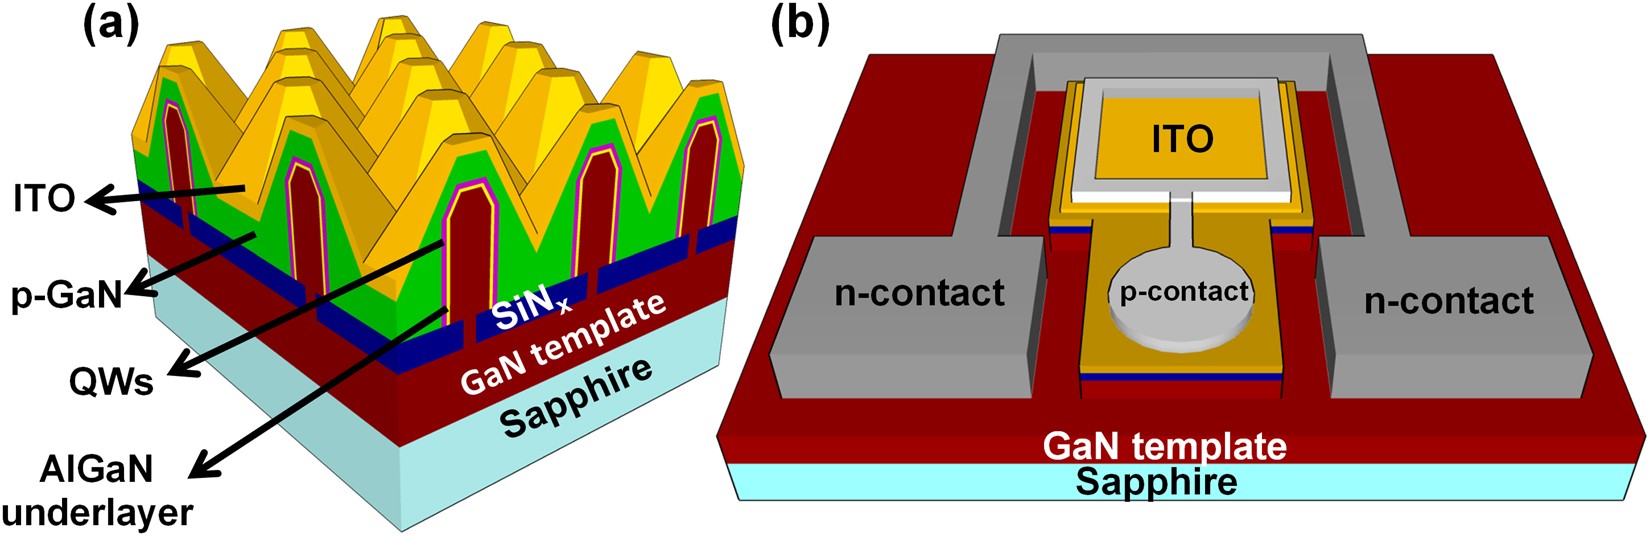 Carrier Dynamics and Electro-Optical Characterization of High-Performance  GaN/InGaN Core-Shell Nanowire Light-Emitting Diodes | Scientific Reports